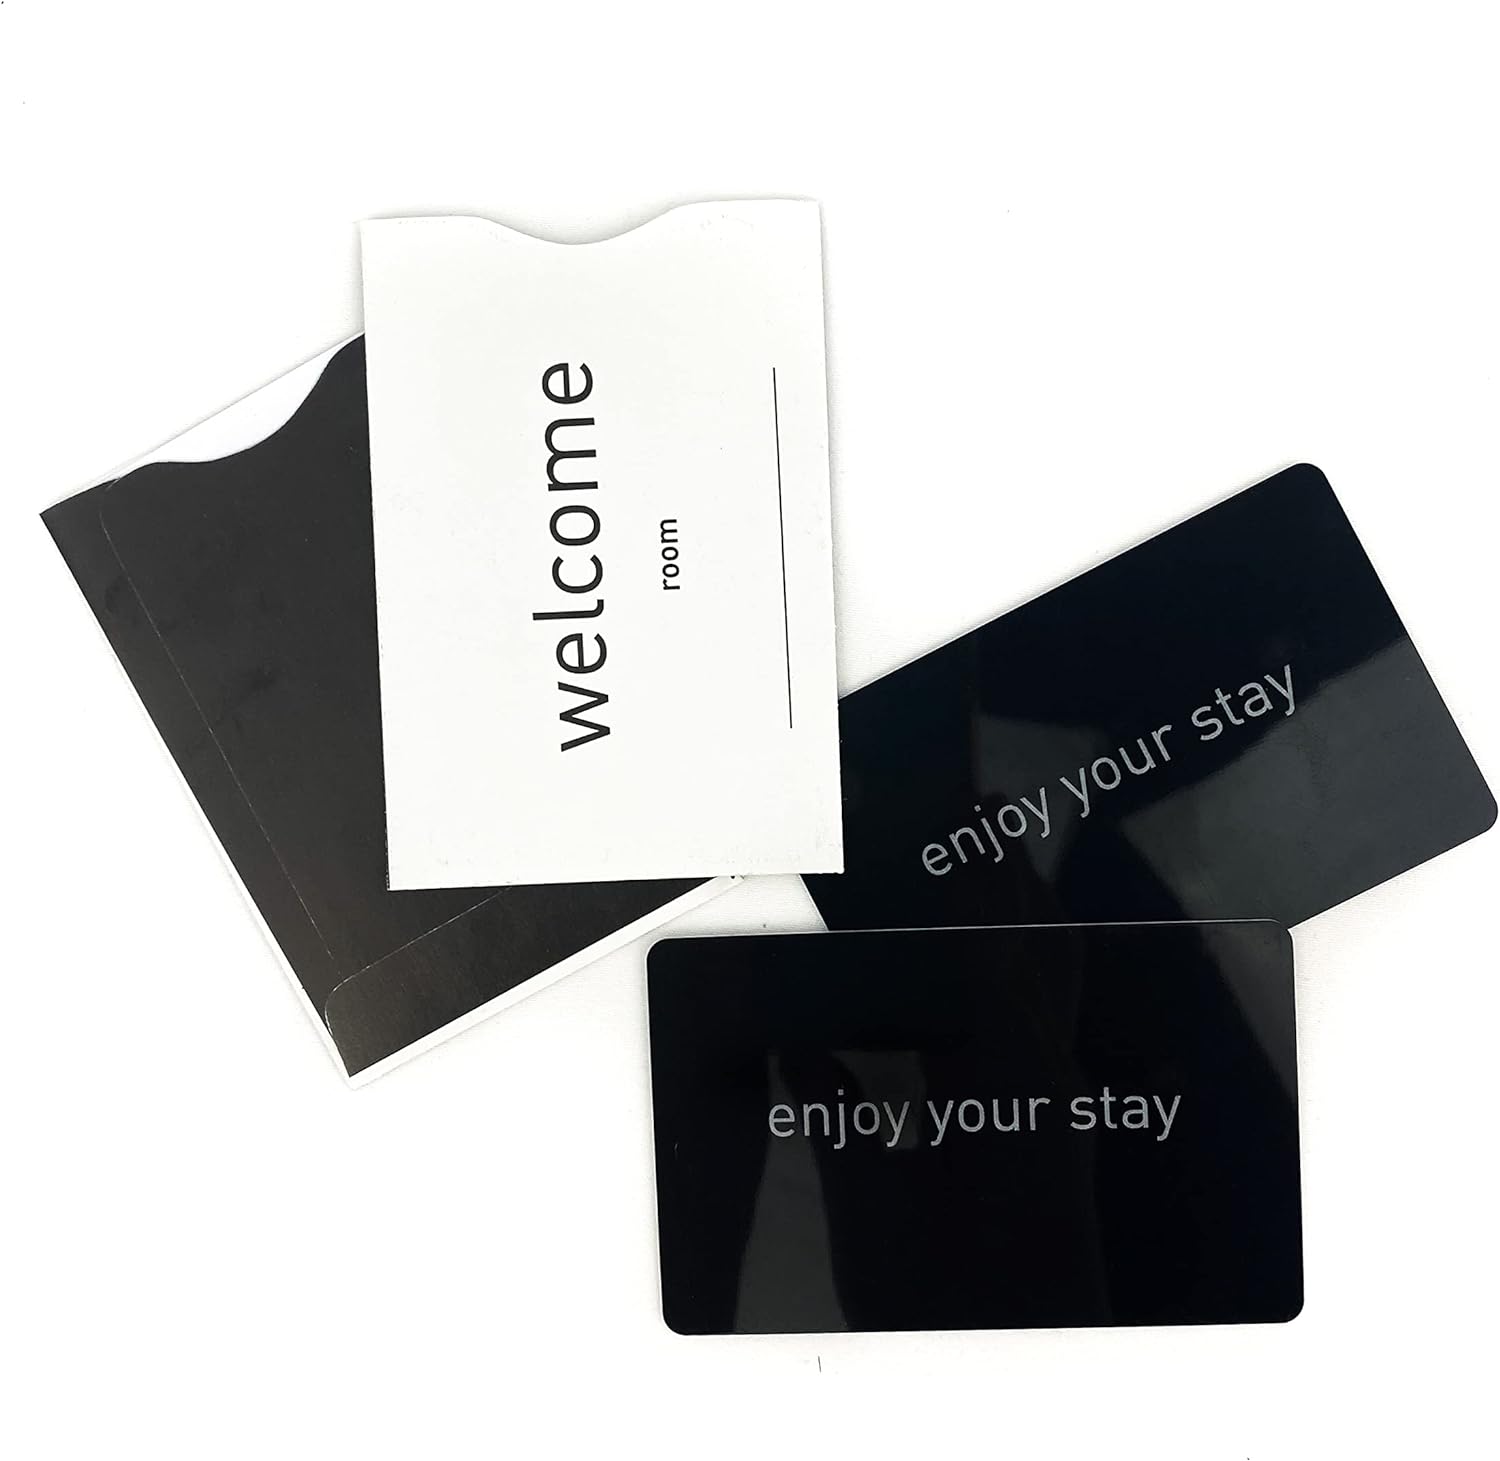 Black and White Custom Hotel Key Card Sleeves for Guests and Businesses, 1,000 Pack, Professional Protective Covers